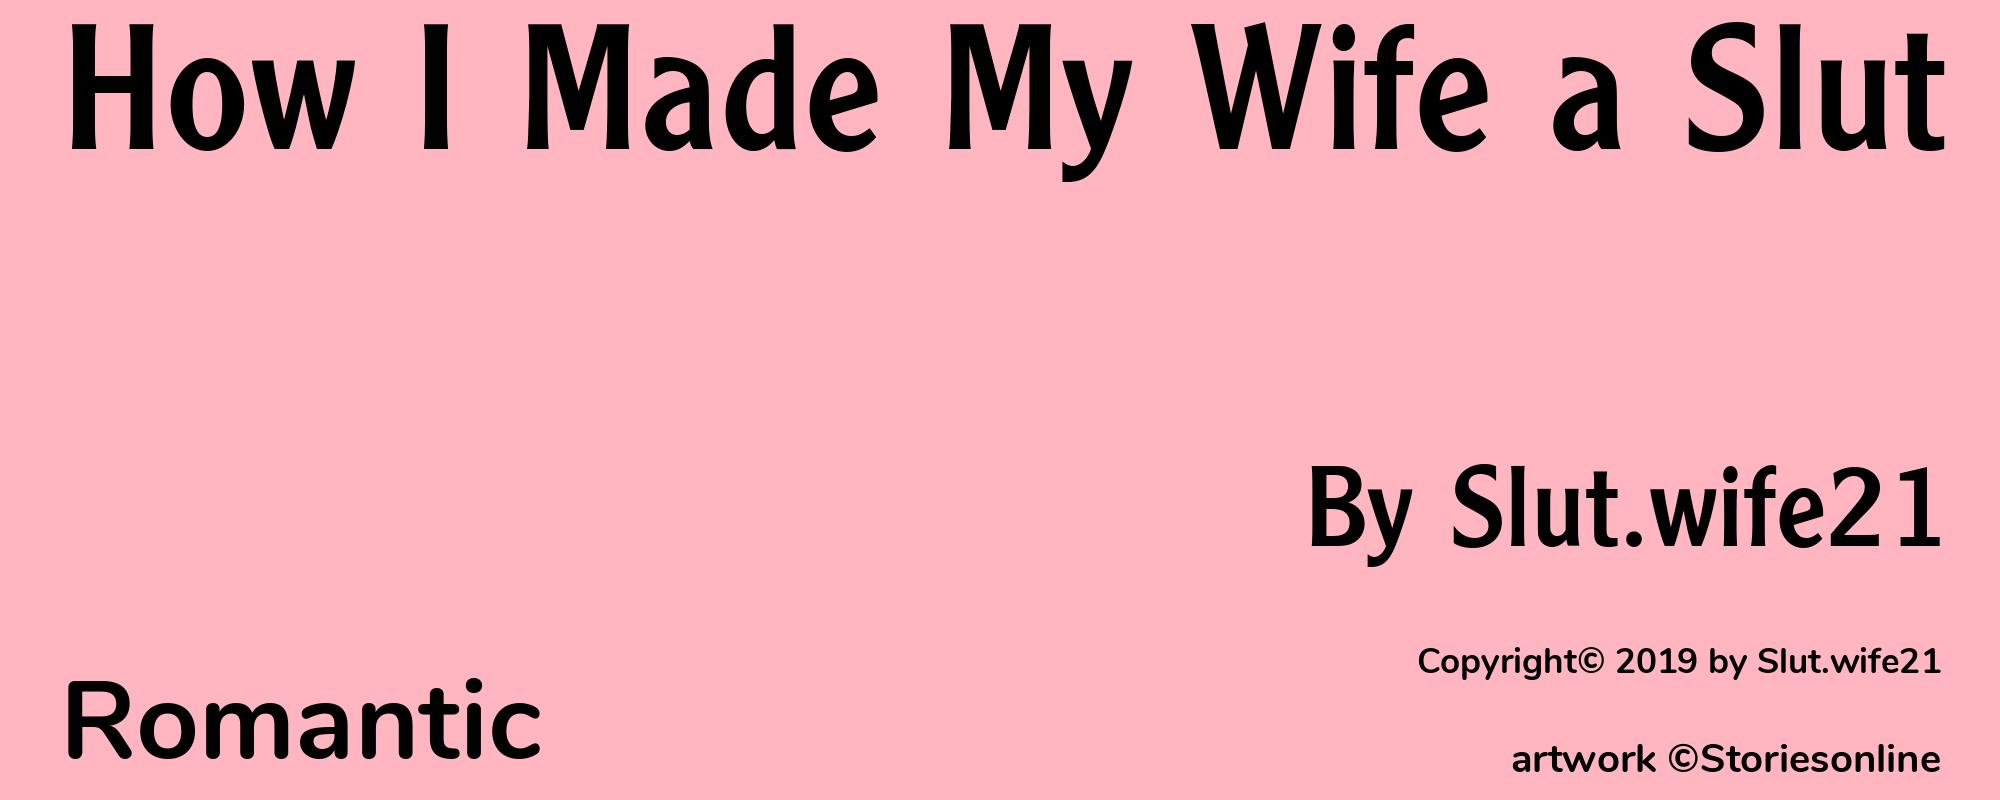 How I Made My Wife a Slut - Cover